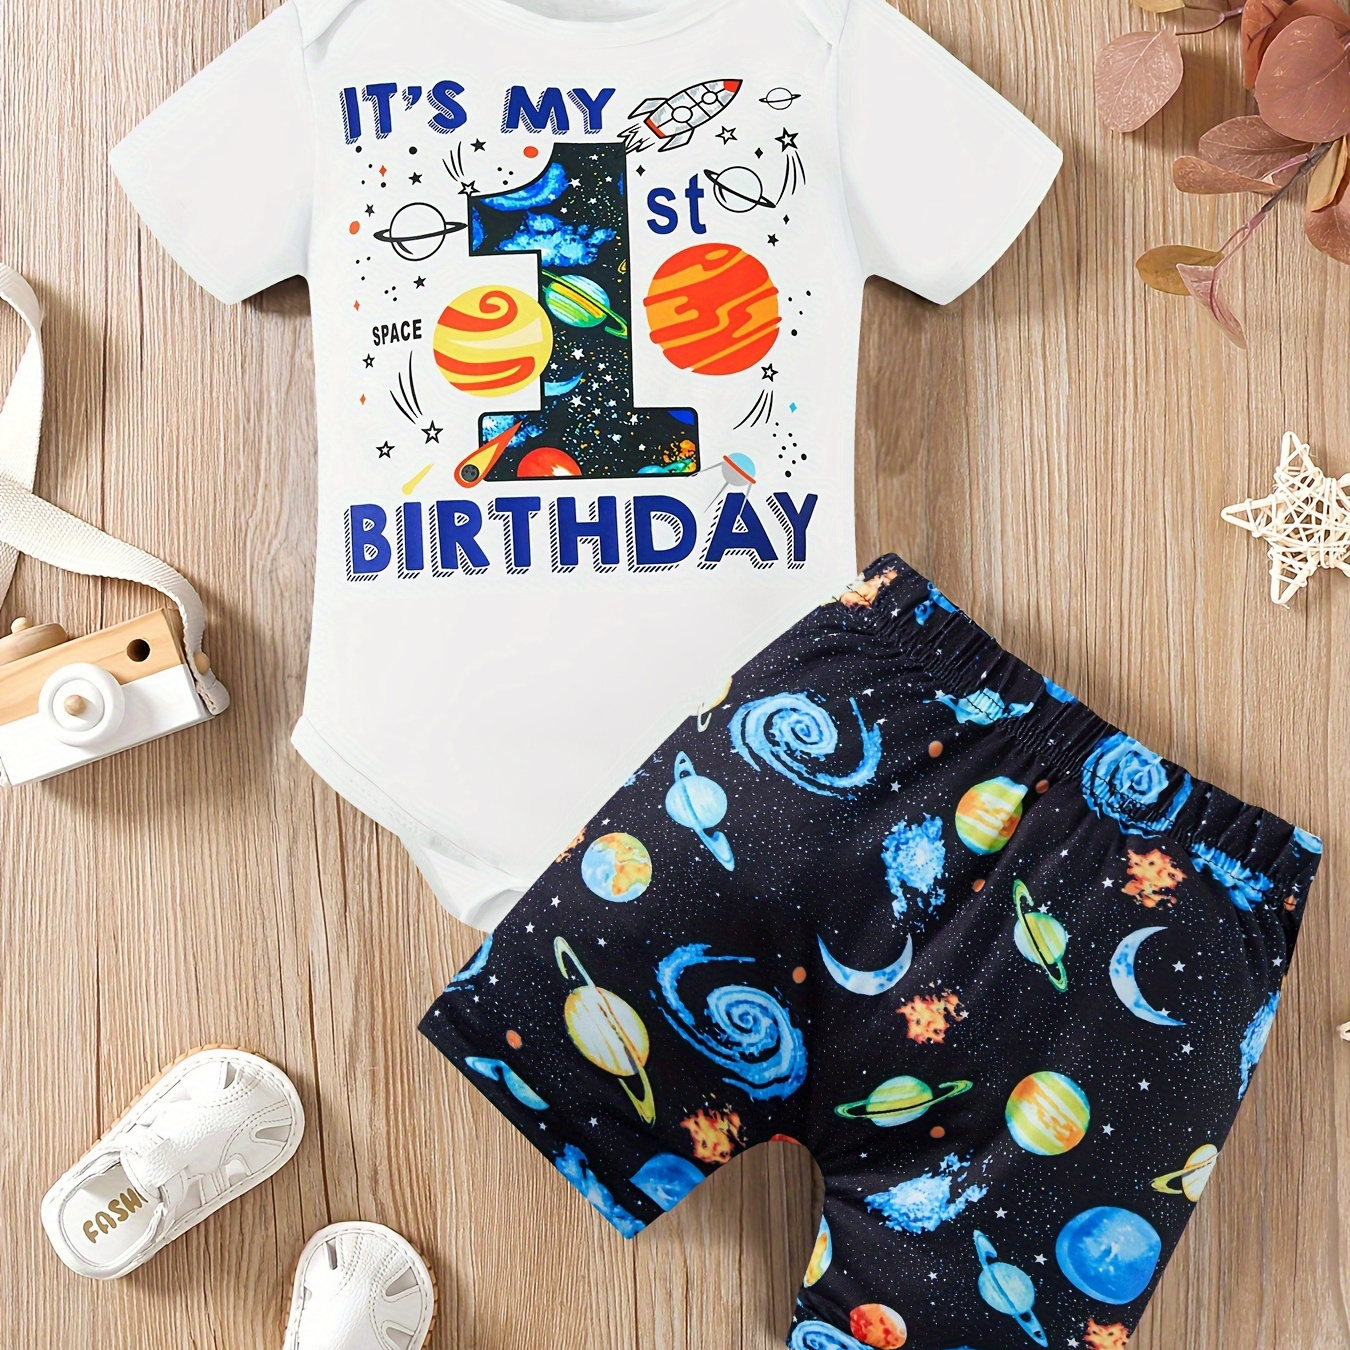 

Baby Boy's Birthday Cotton Outfit, Space Theme Short Sleeve Romper + Pants Set, Casual Style, Cake Smash Bodysuit, Infant Party Clothing, With Stars & Planets Design